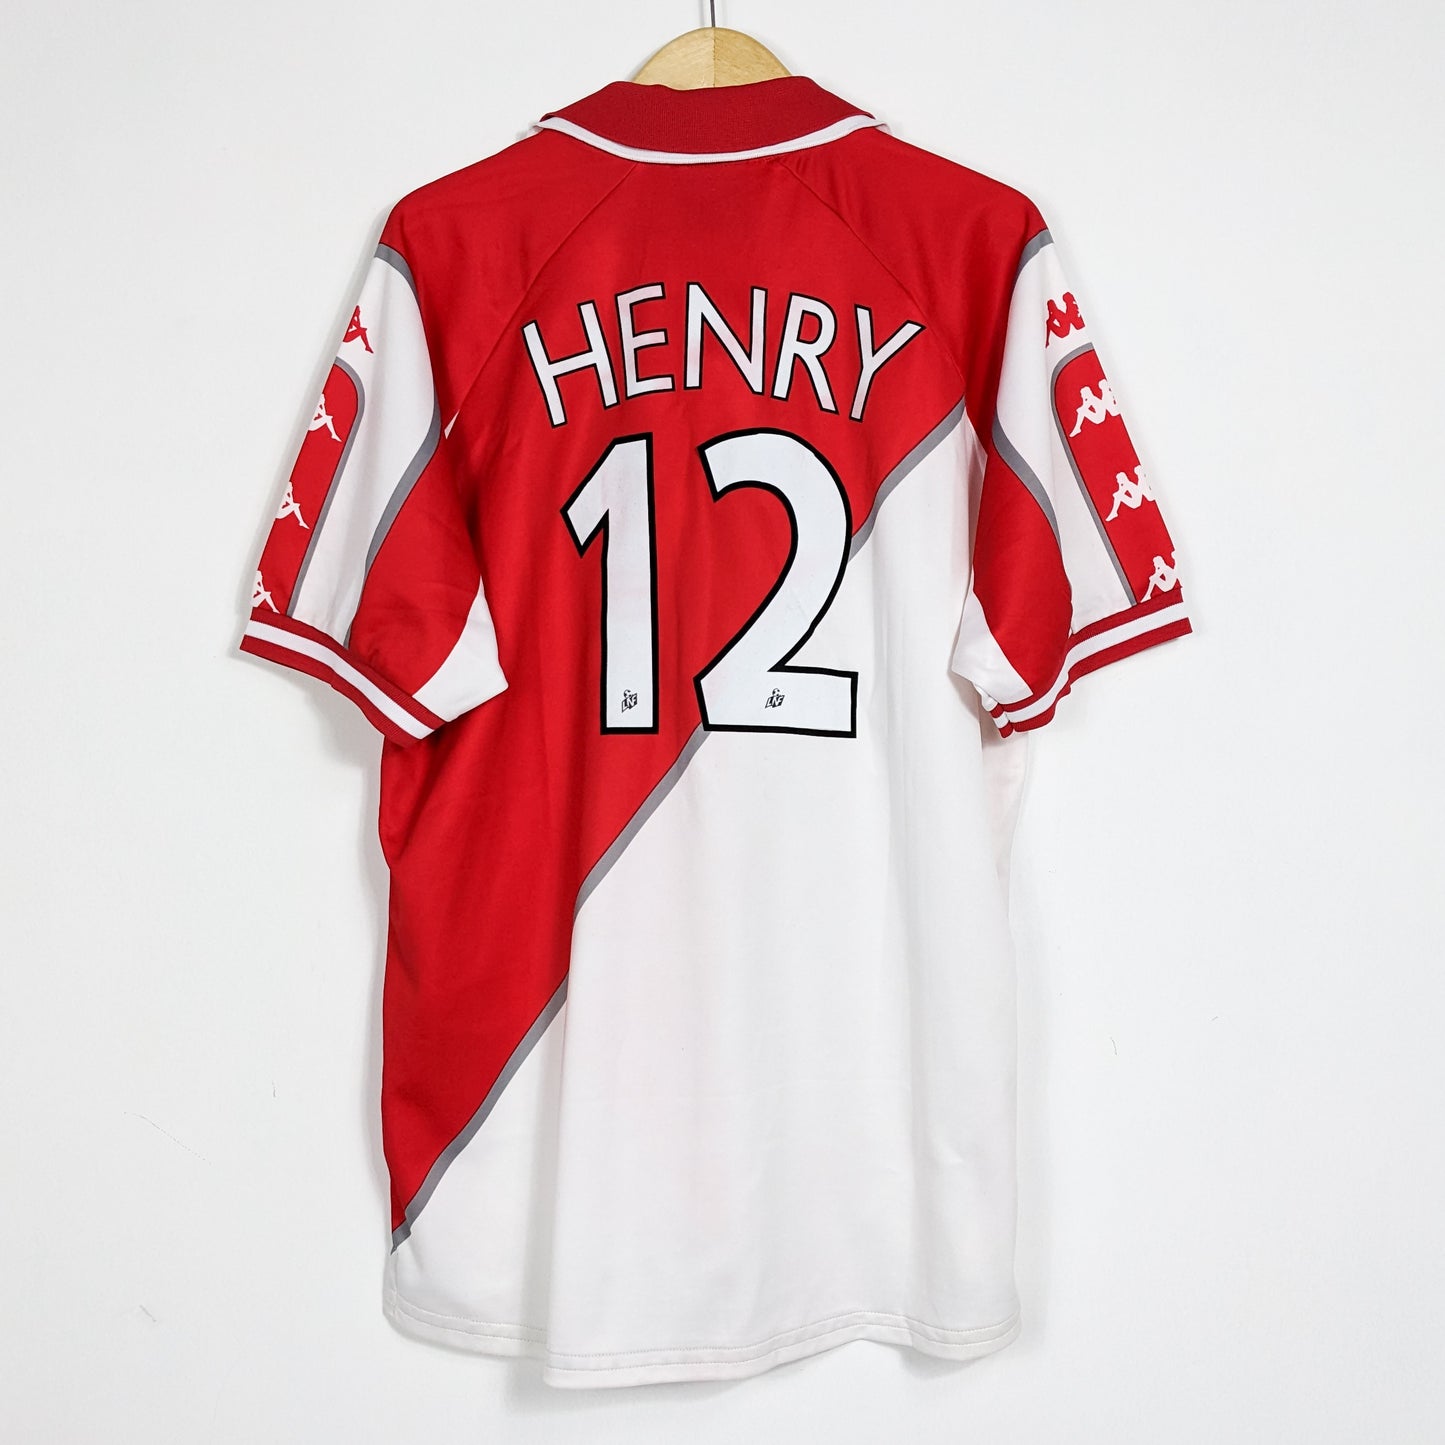 Authentic AS Monaco 1998/1999 Home - Henry #14 Size XL